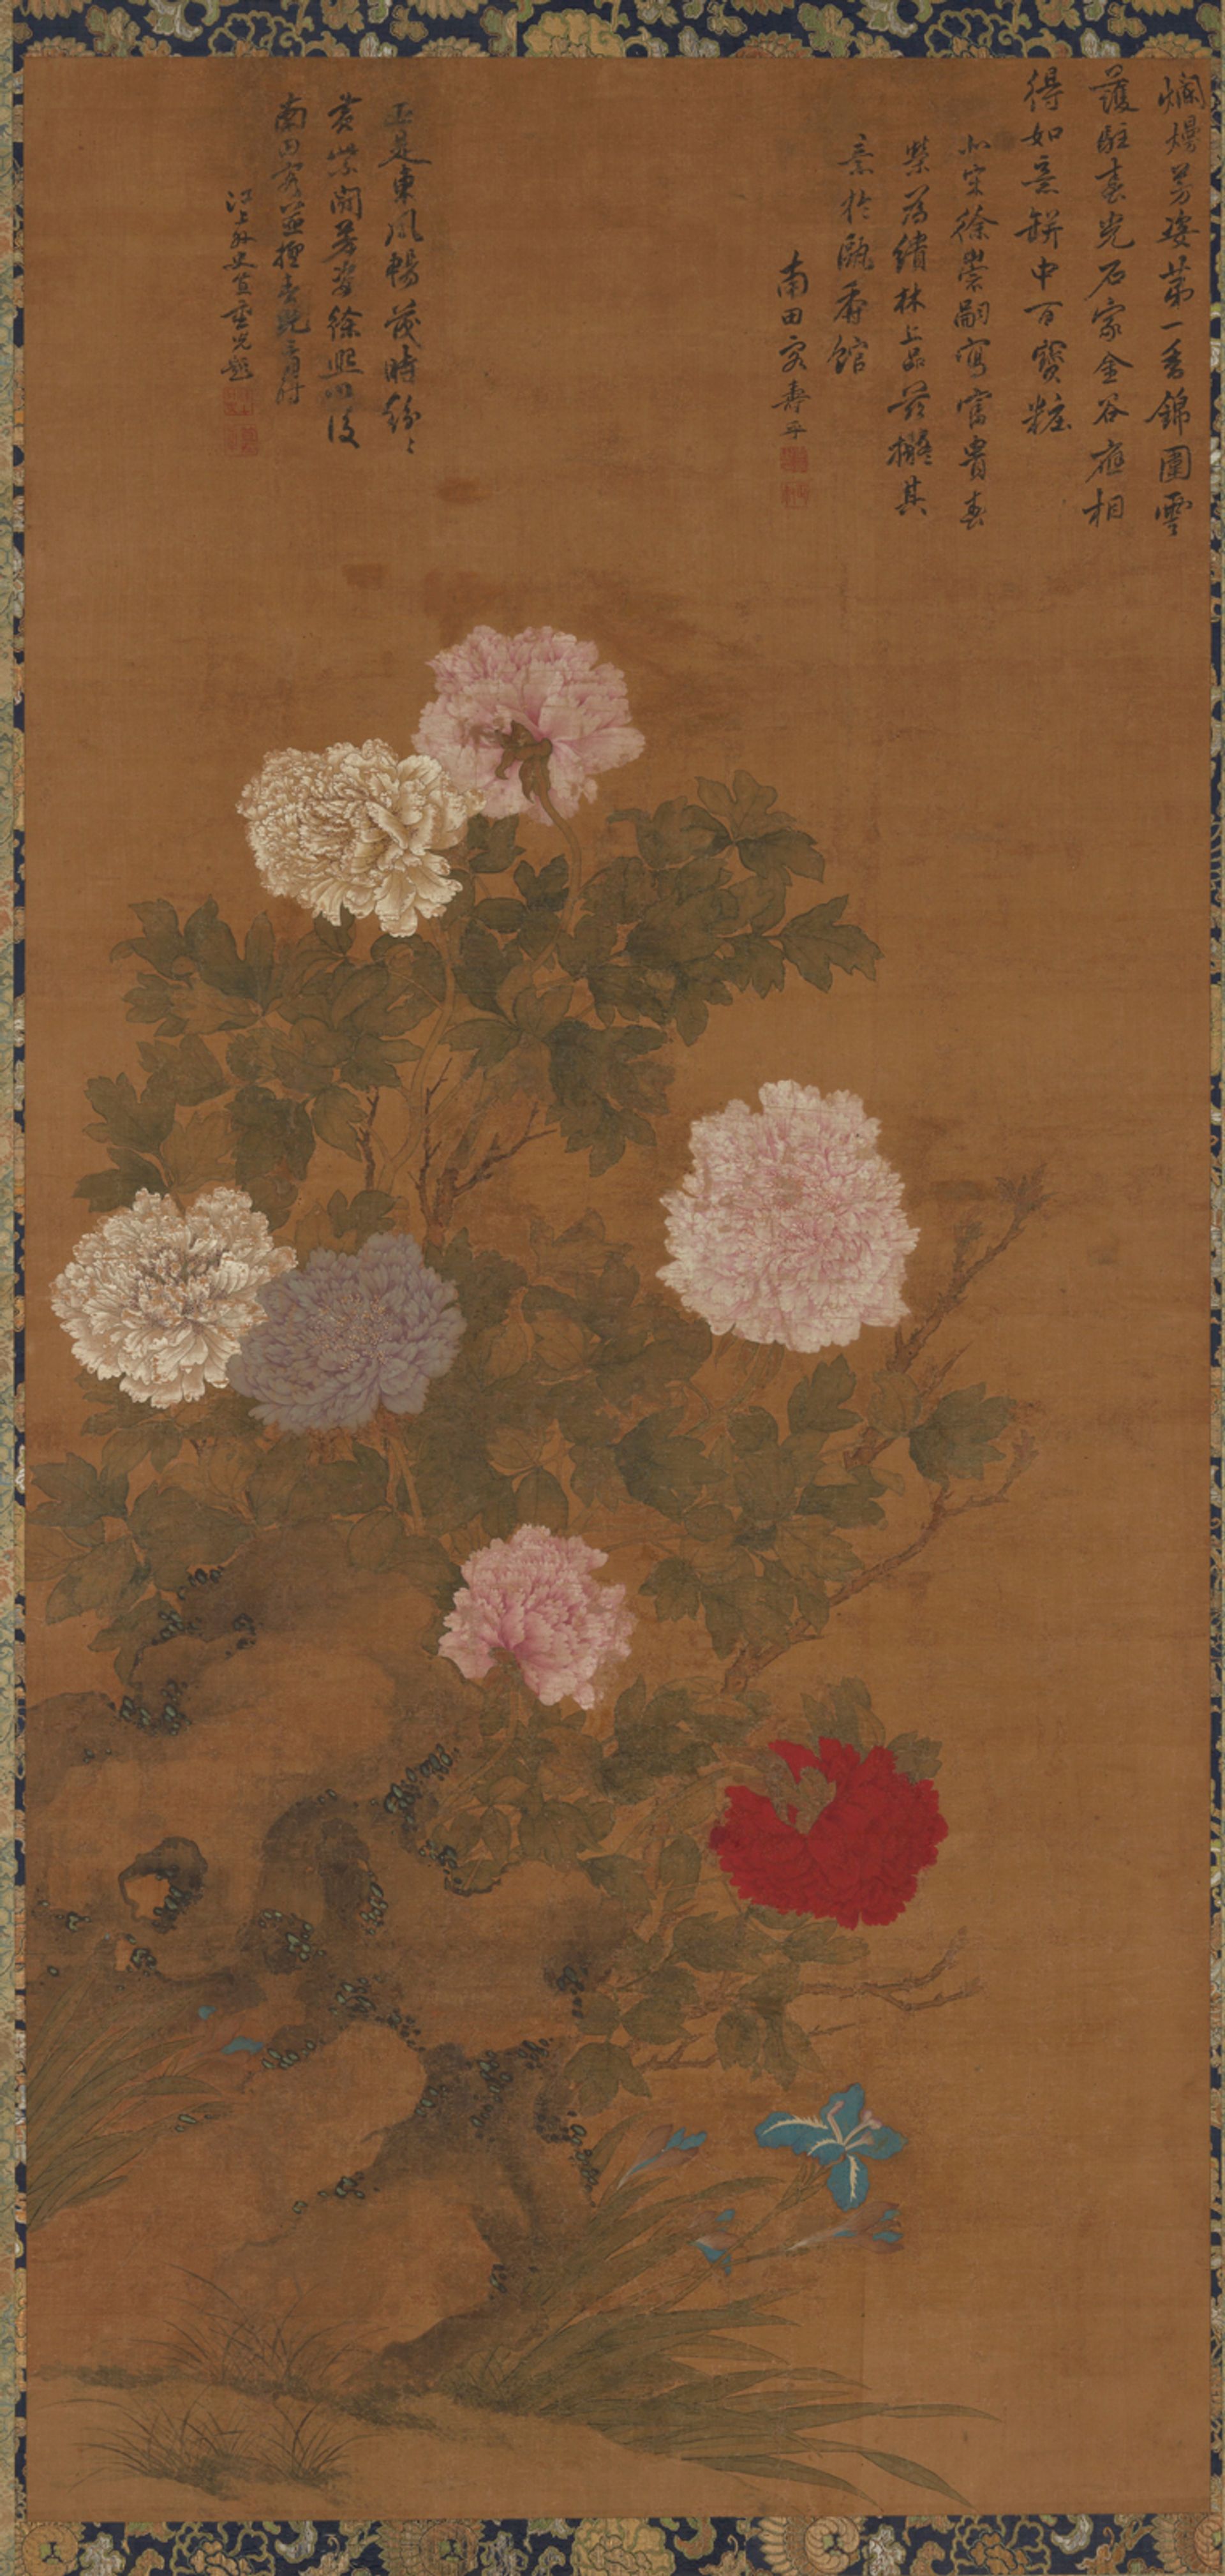 The Smithsonian's National Museum of Asian Artm, the Freer Gallery of Art and Arthur M. Sackler Gallery,  houses more the 42,000 items of Asian art including this Qing dynasty scroll © Freer Gallery of Art and Arthur M. Sackler Gallery